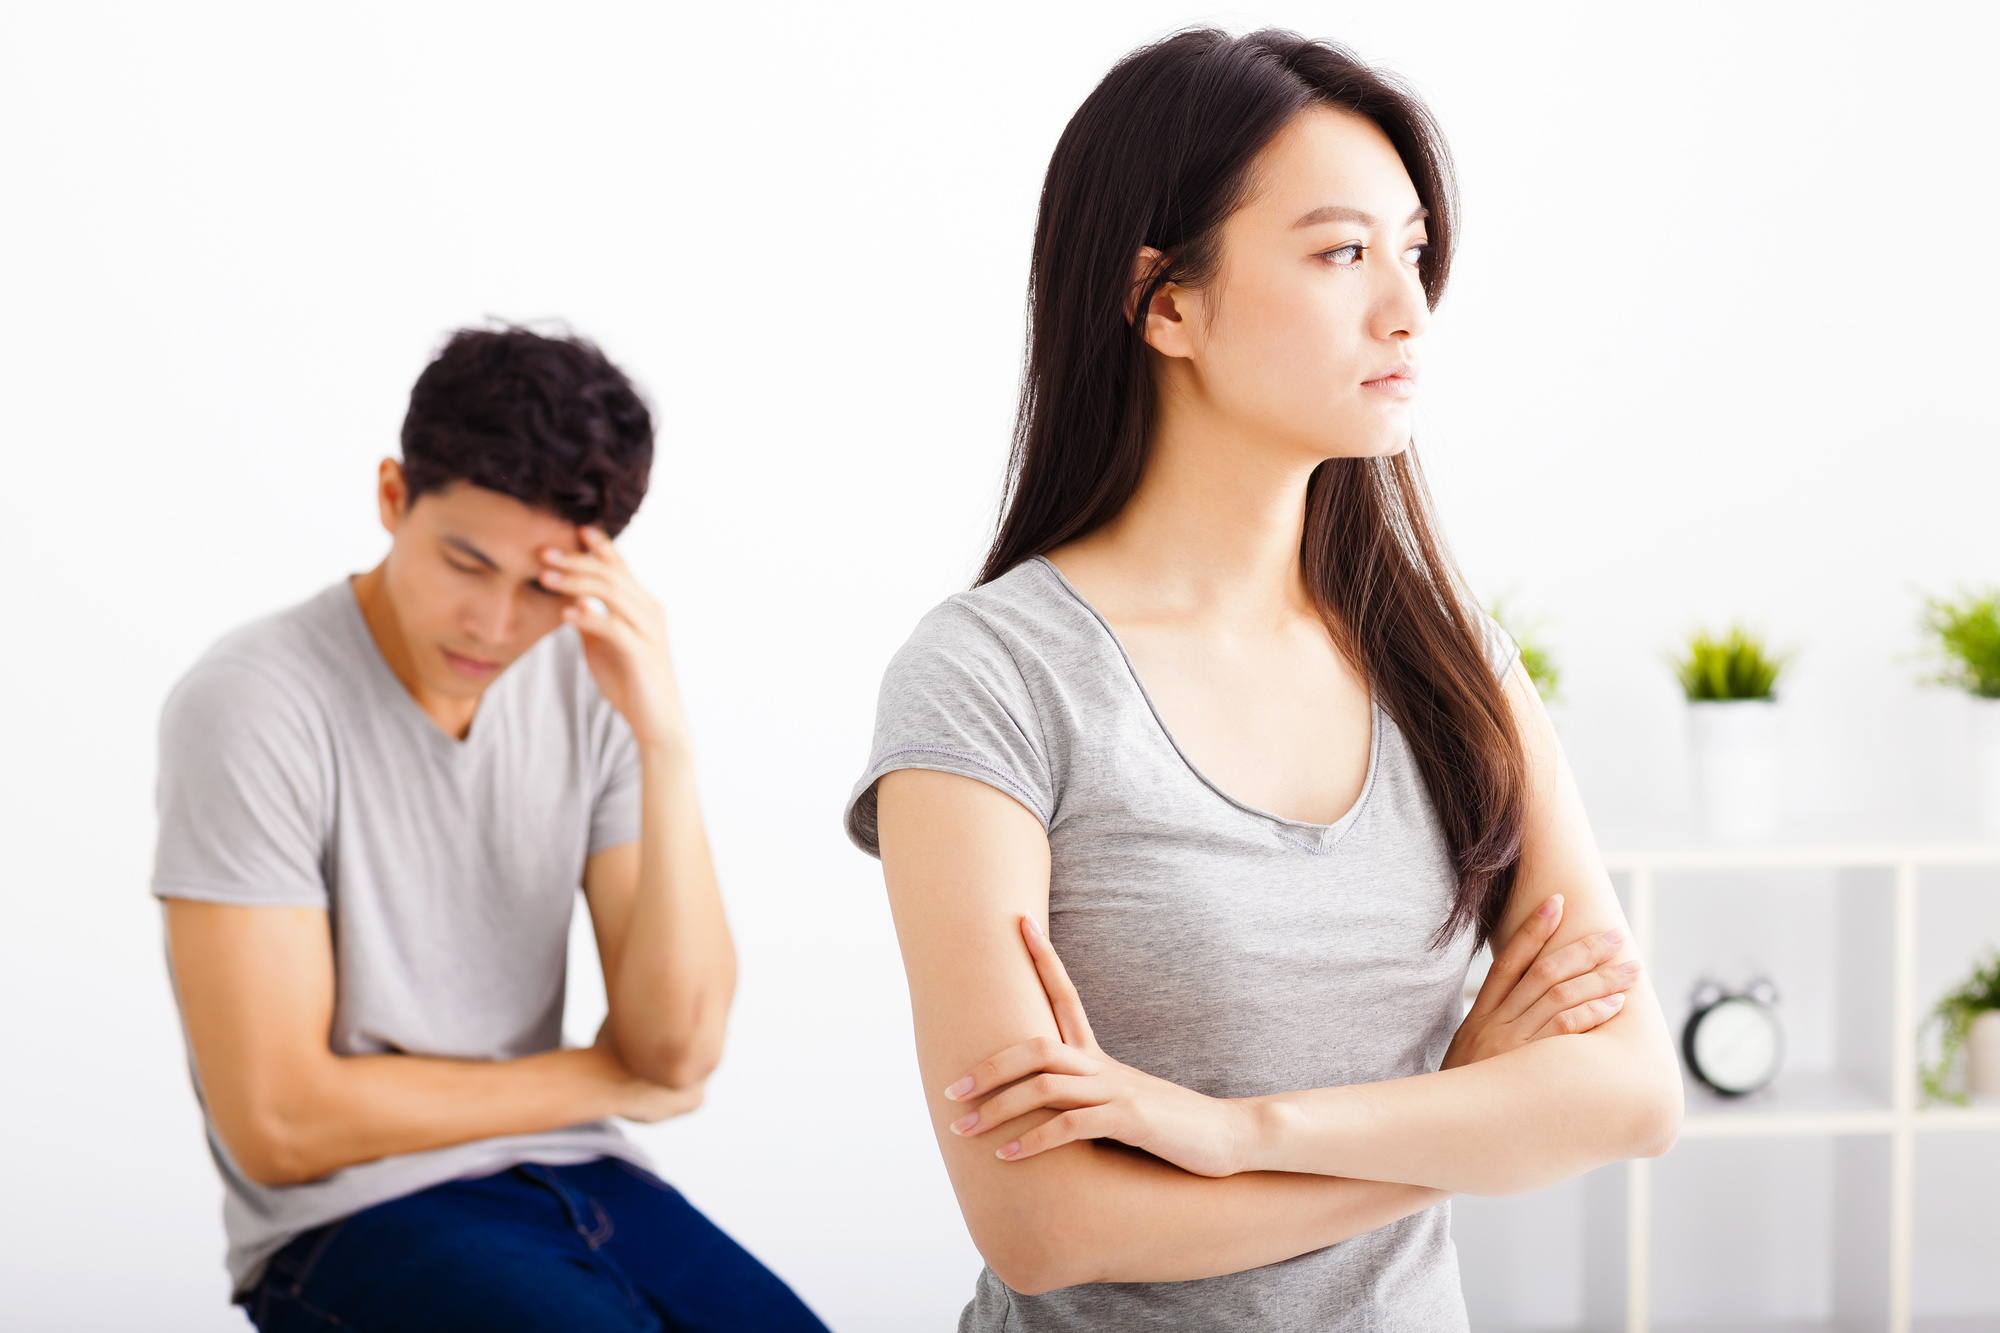 how to heal from relationship trauma